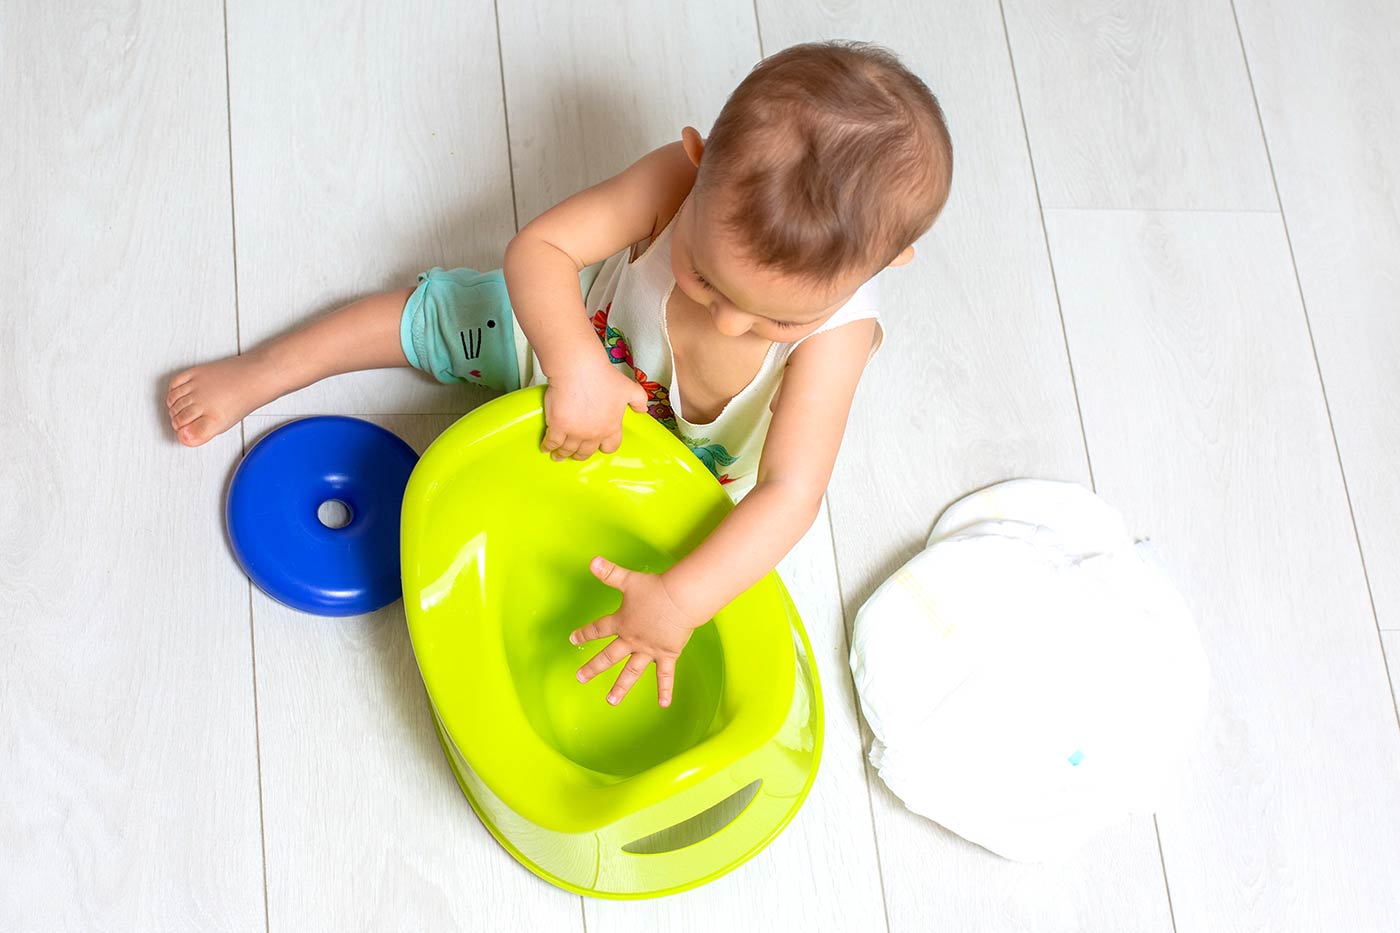 Toddler Refuses to Sit on the Potty